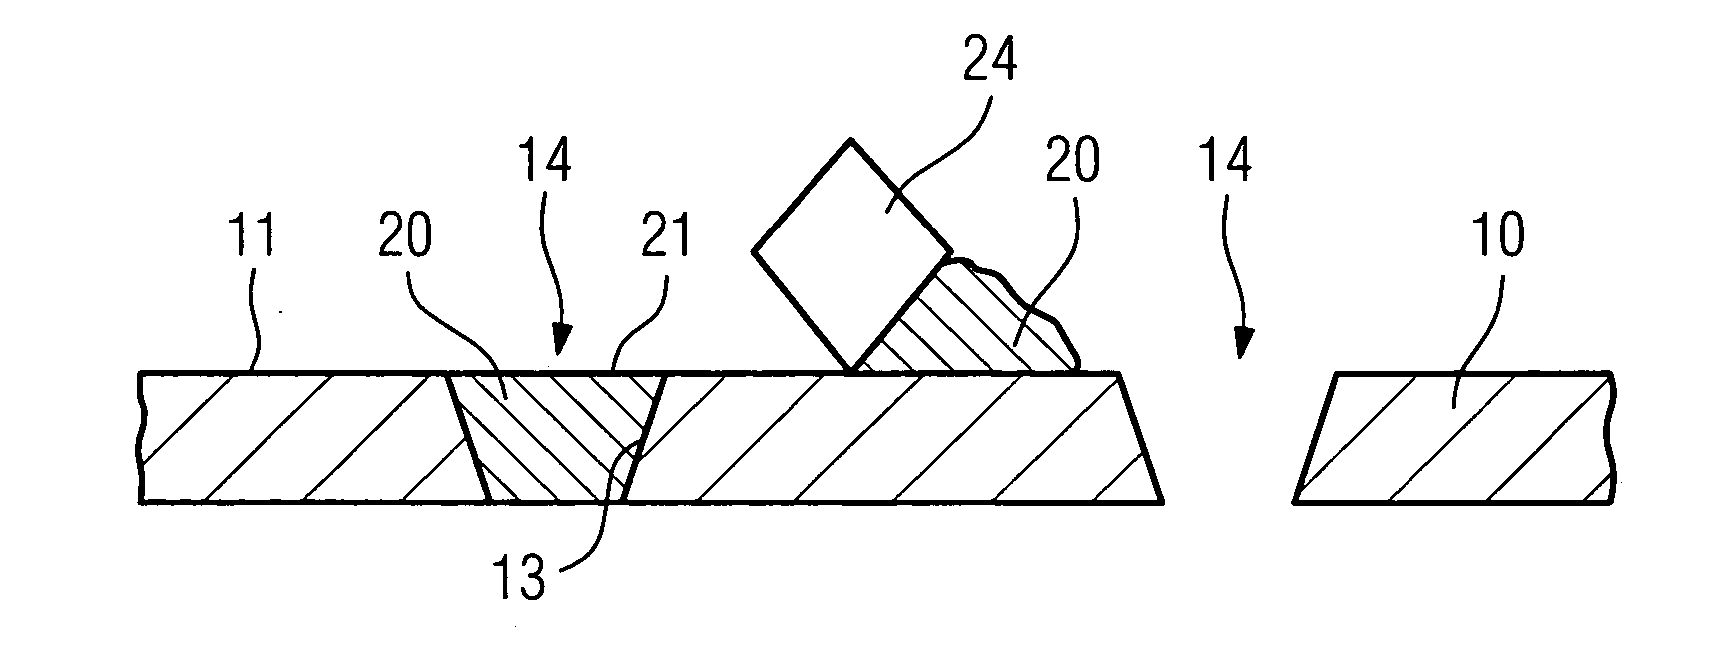 Process for protecting openings in a component during a treatment process, preventing penetration of material, and a ceramic material